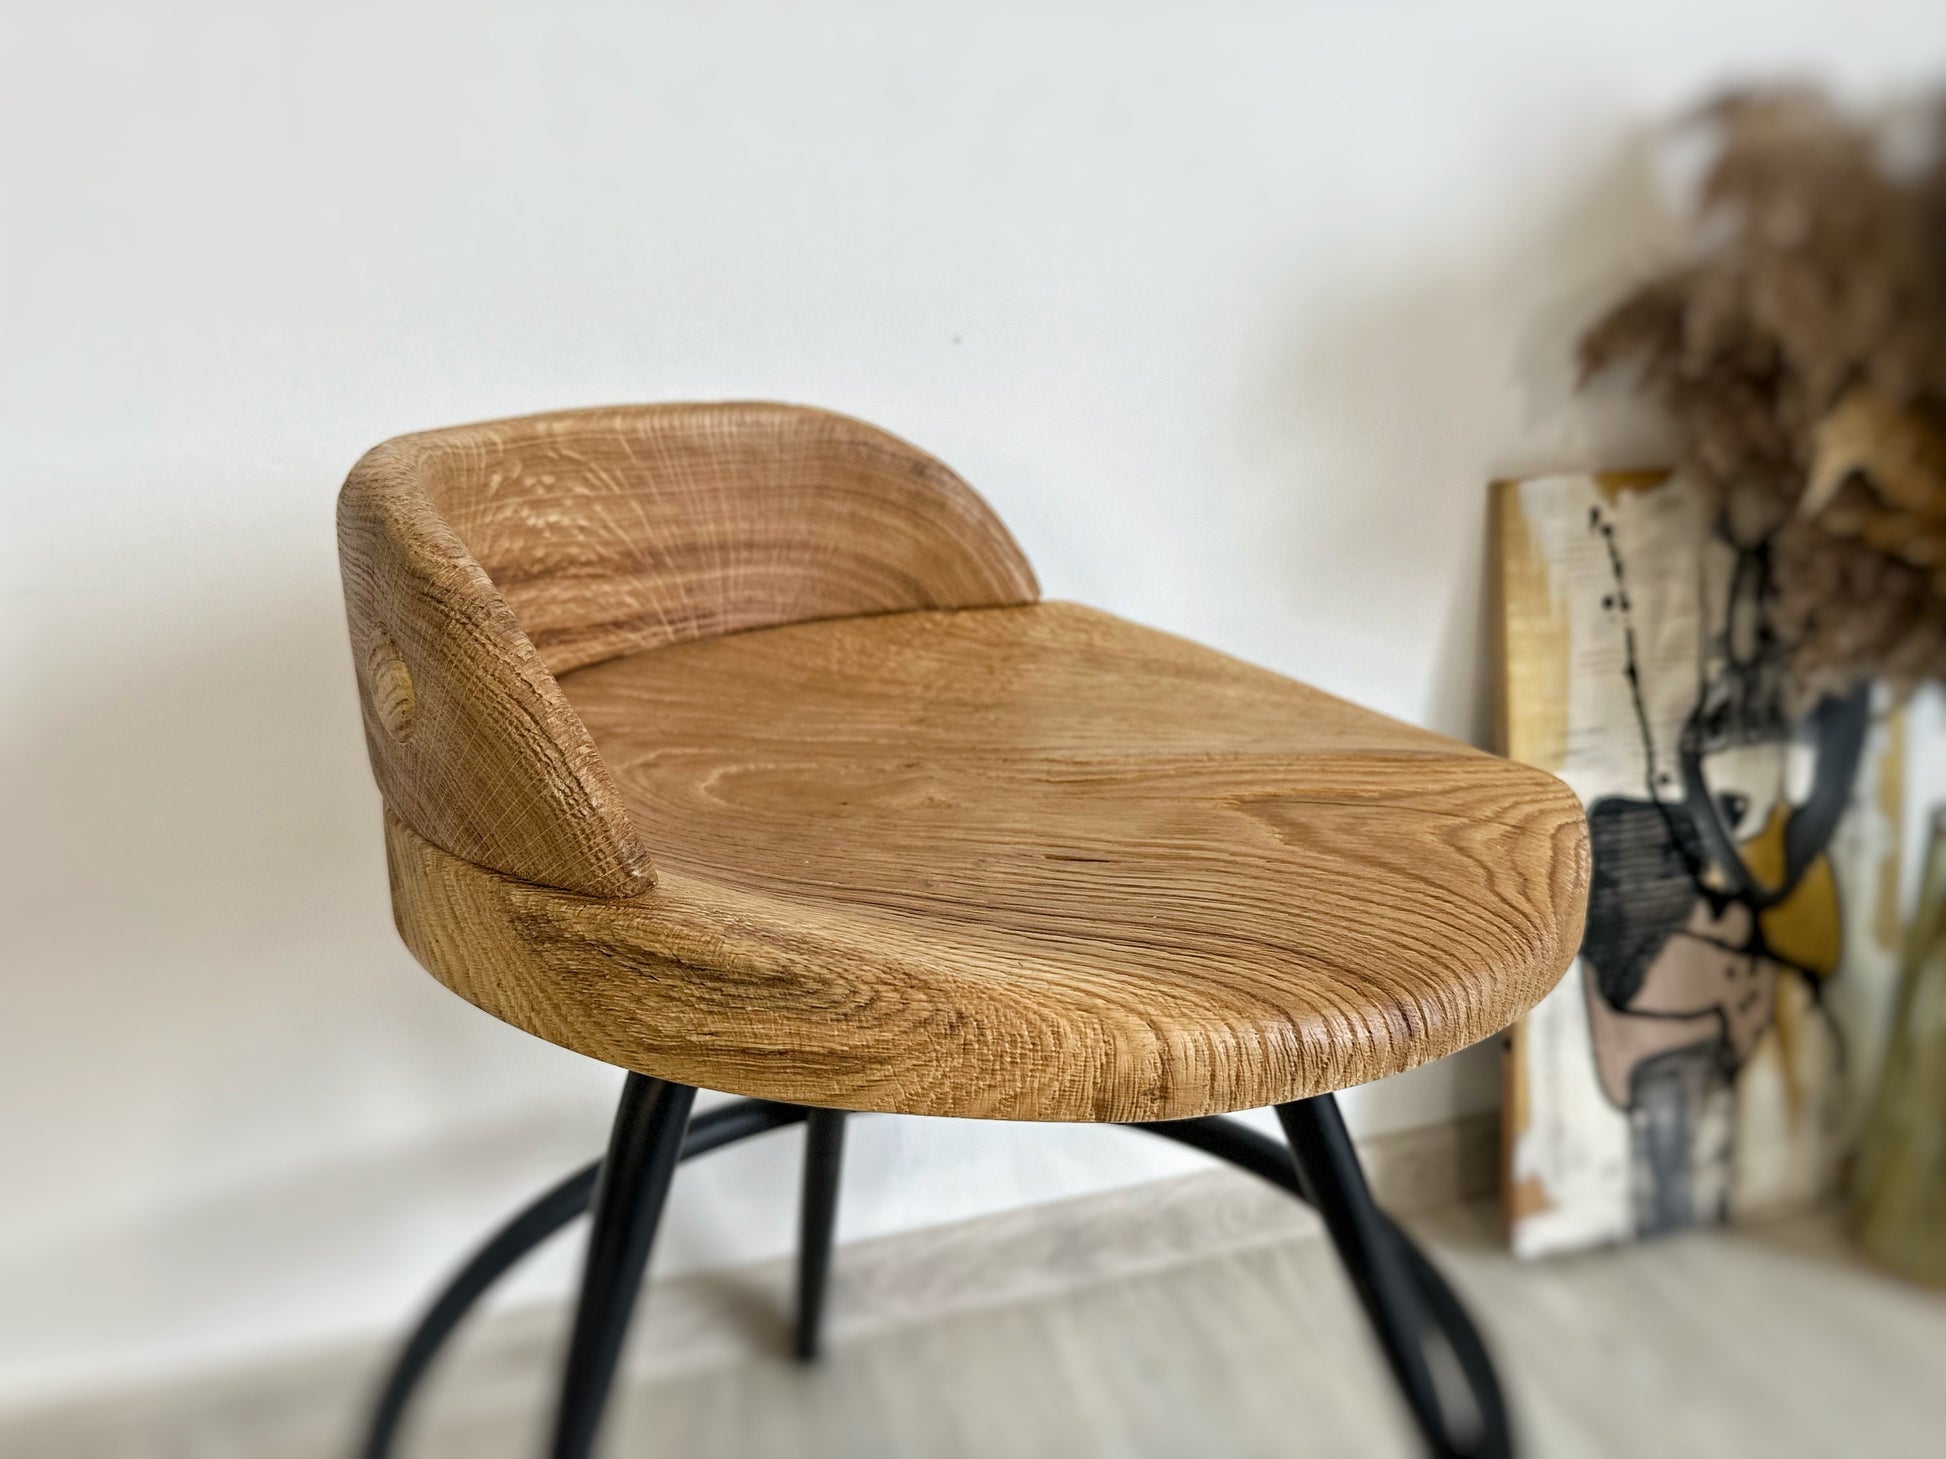 Wood oak bar stool chair, only wooden seat, chair seat, bar chair with back, dining chairs, reclaimed wood, handmade furniture, accent chair